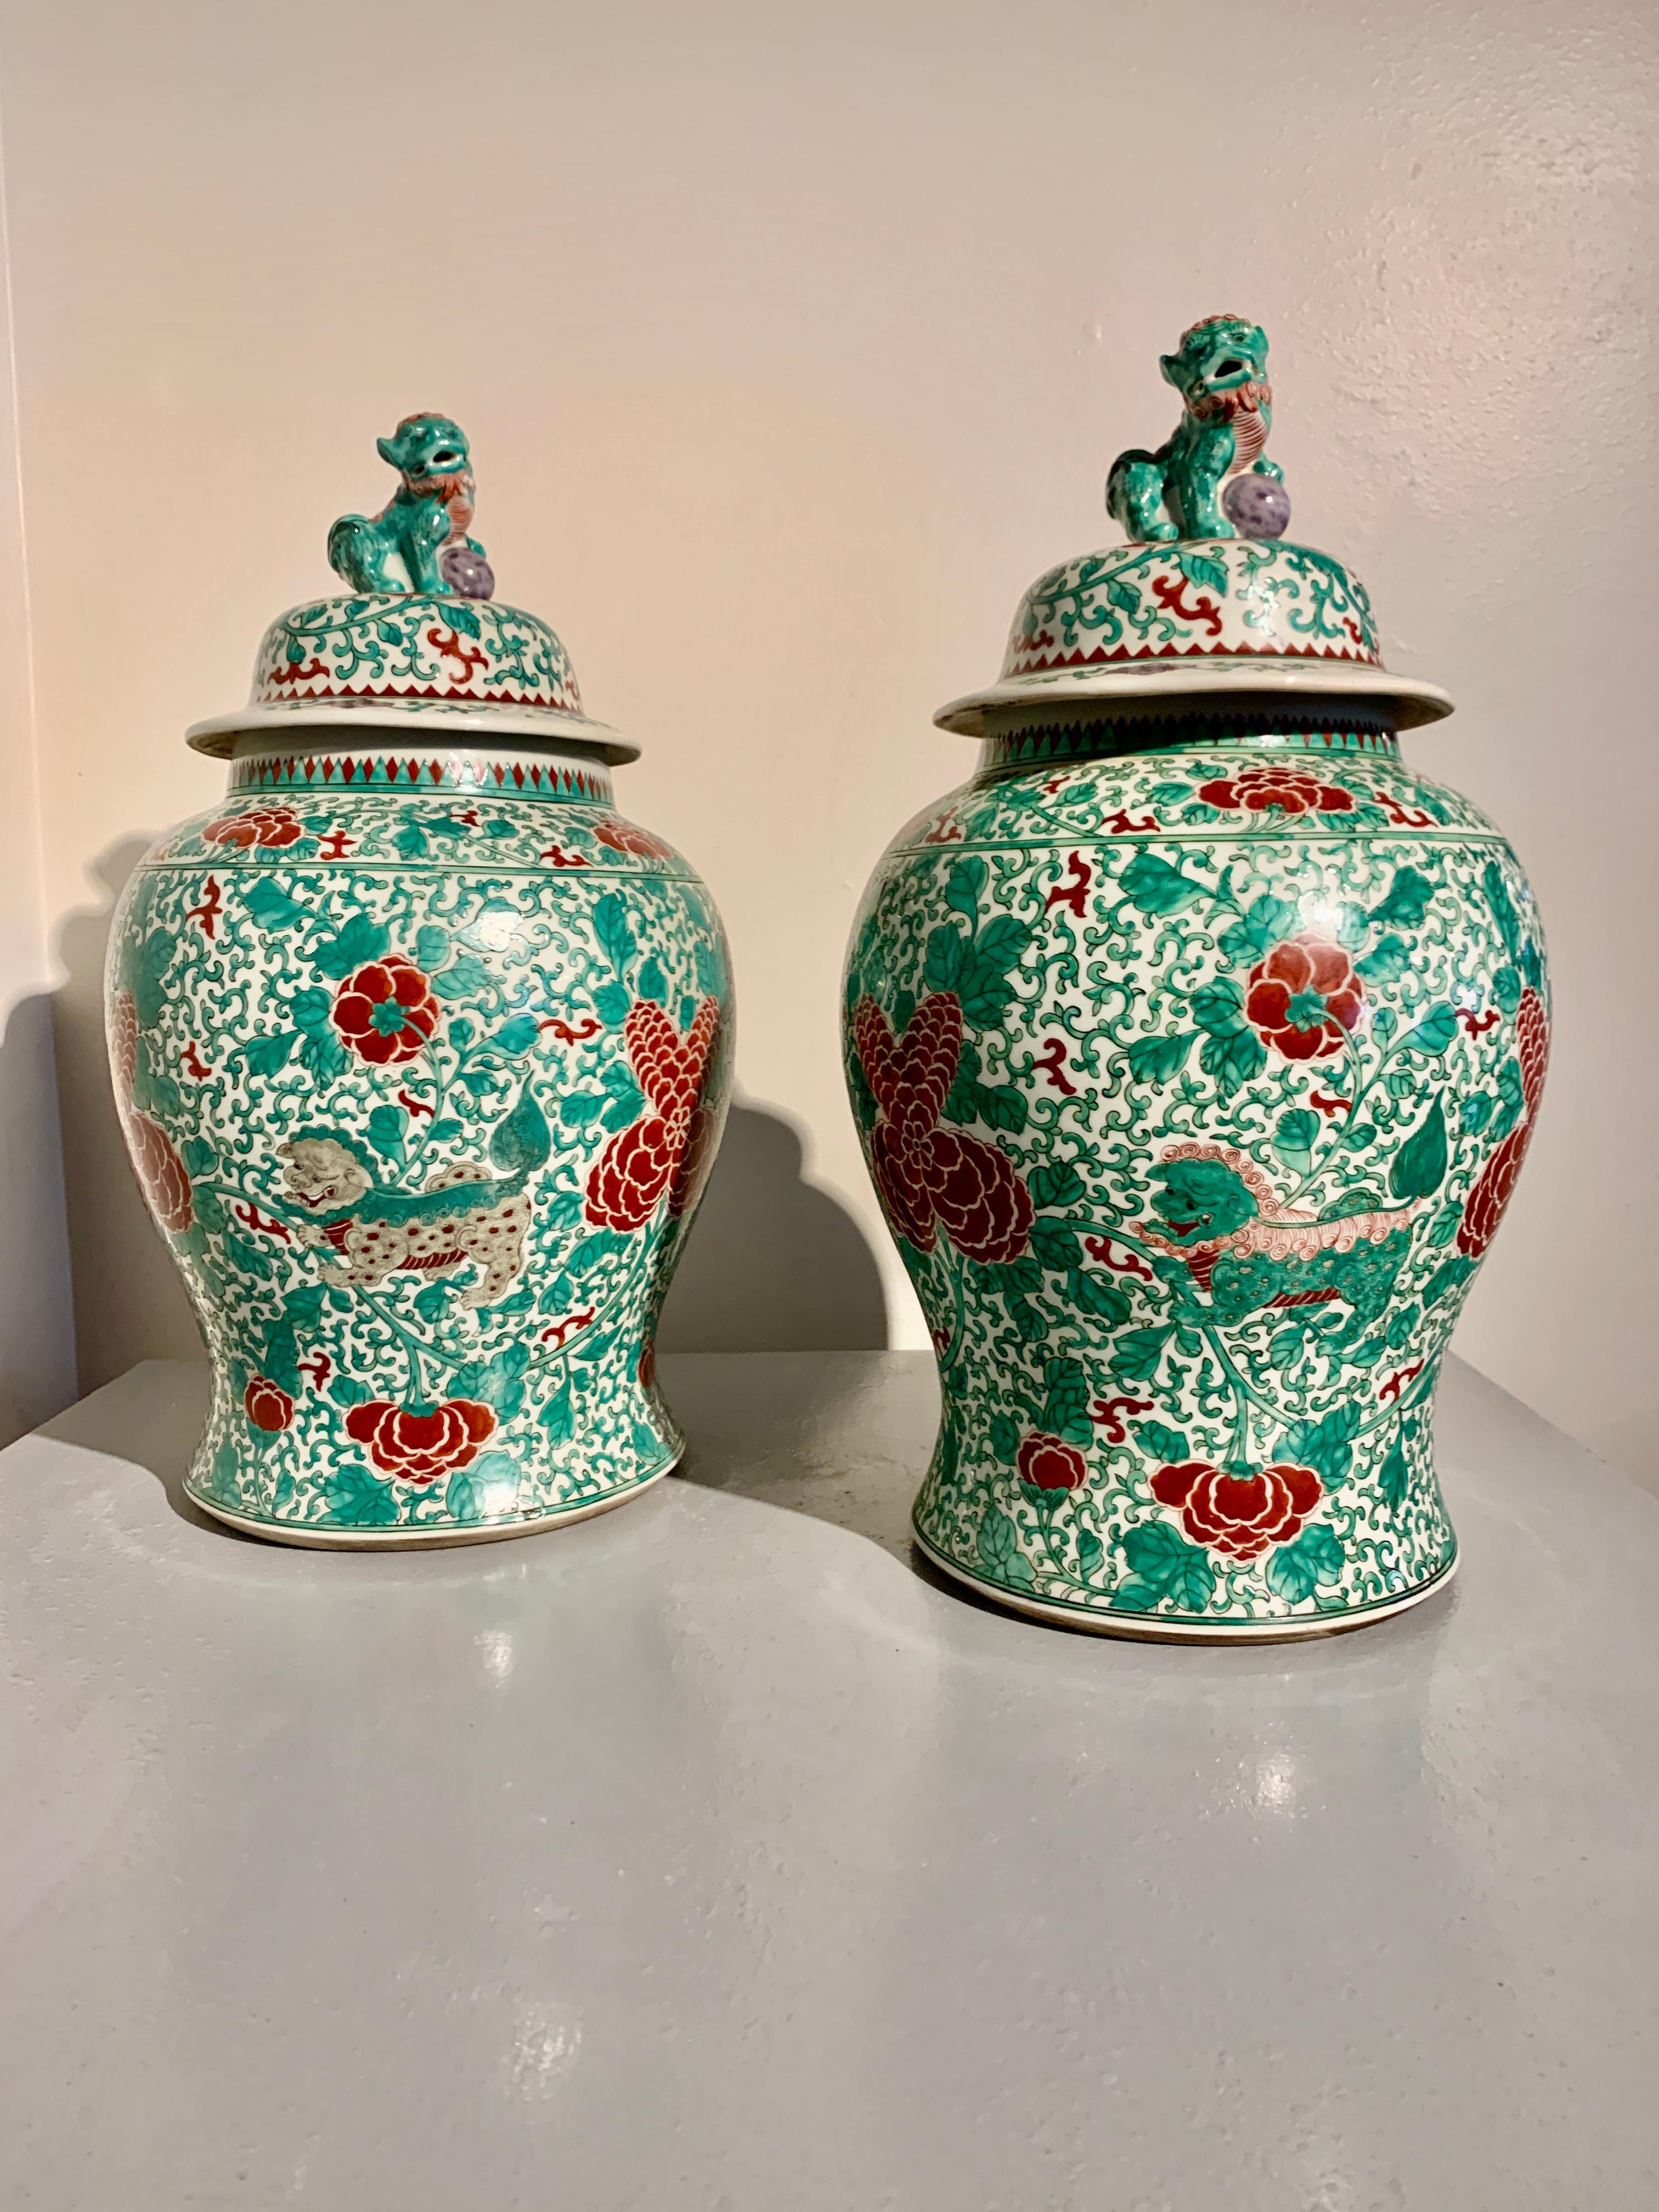 A delightful pair of Chinese famille verte enameled porcelain covered jars with foo lions, circa 1960's, China.

The jars of baluster form and painted in bold and bright famille verte enamels of primarily green and red, with areas of puce and gray.